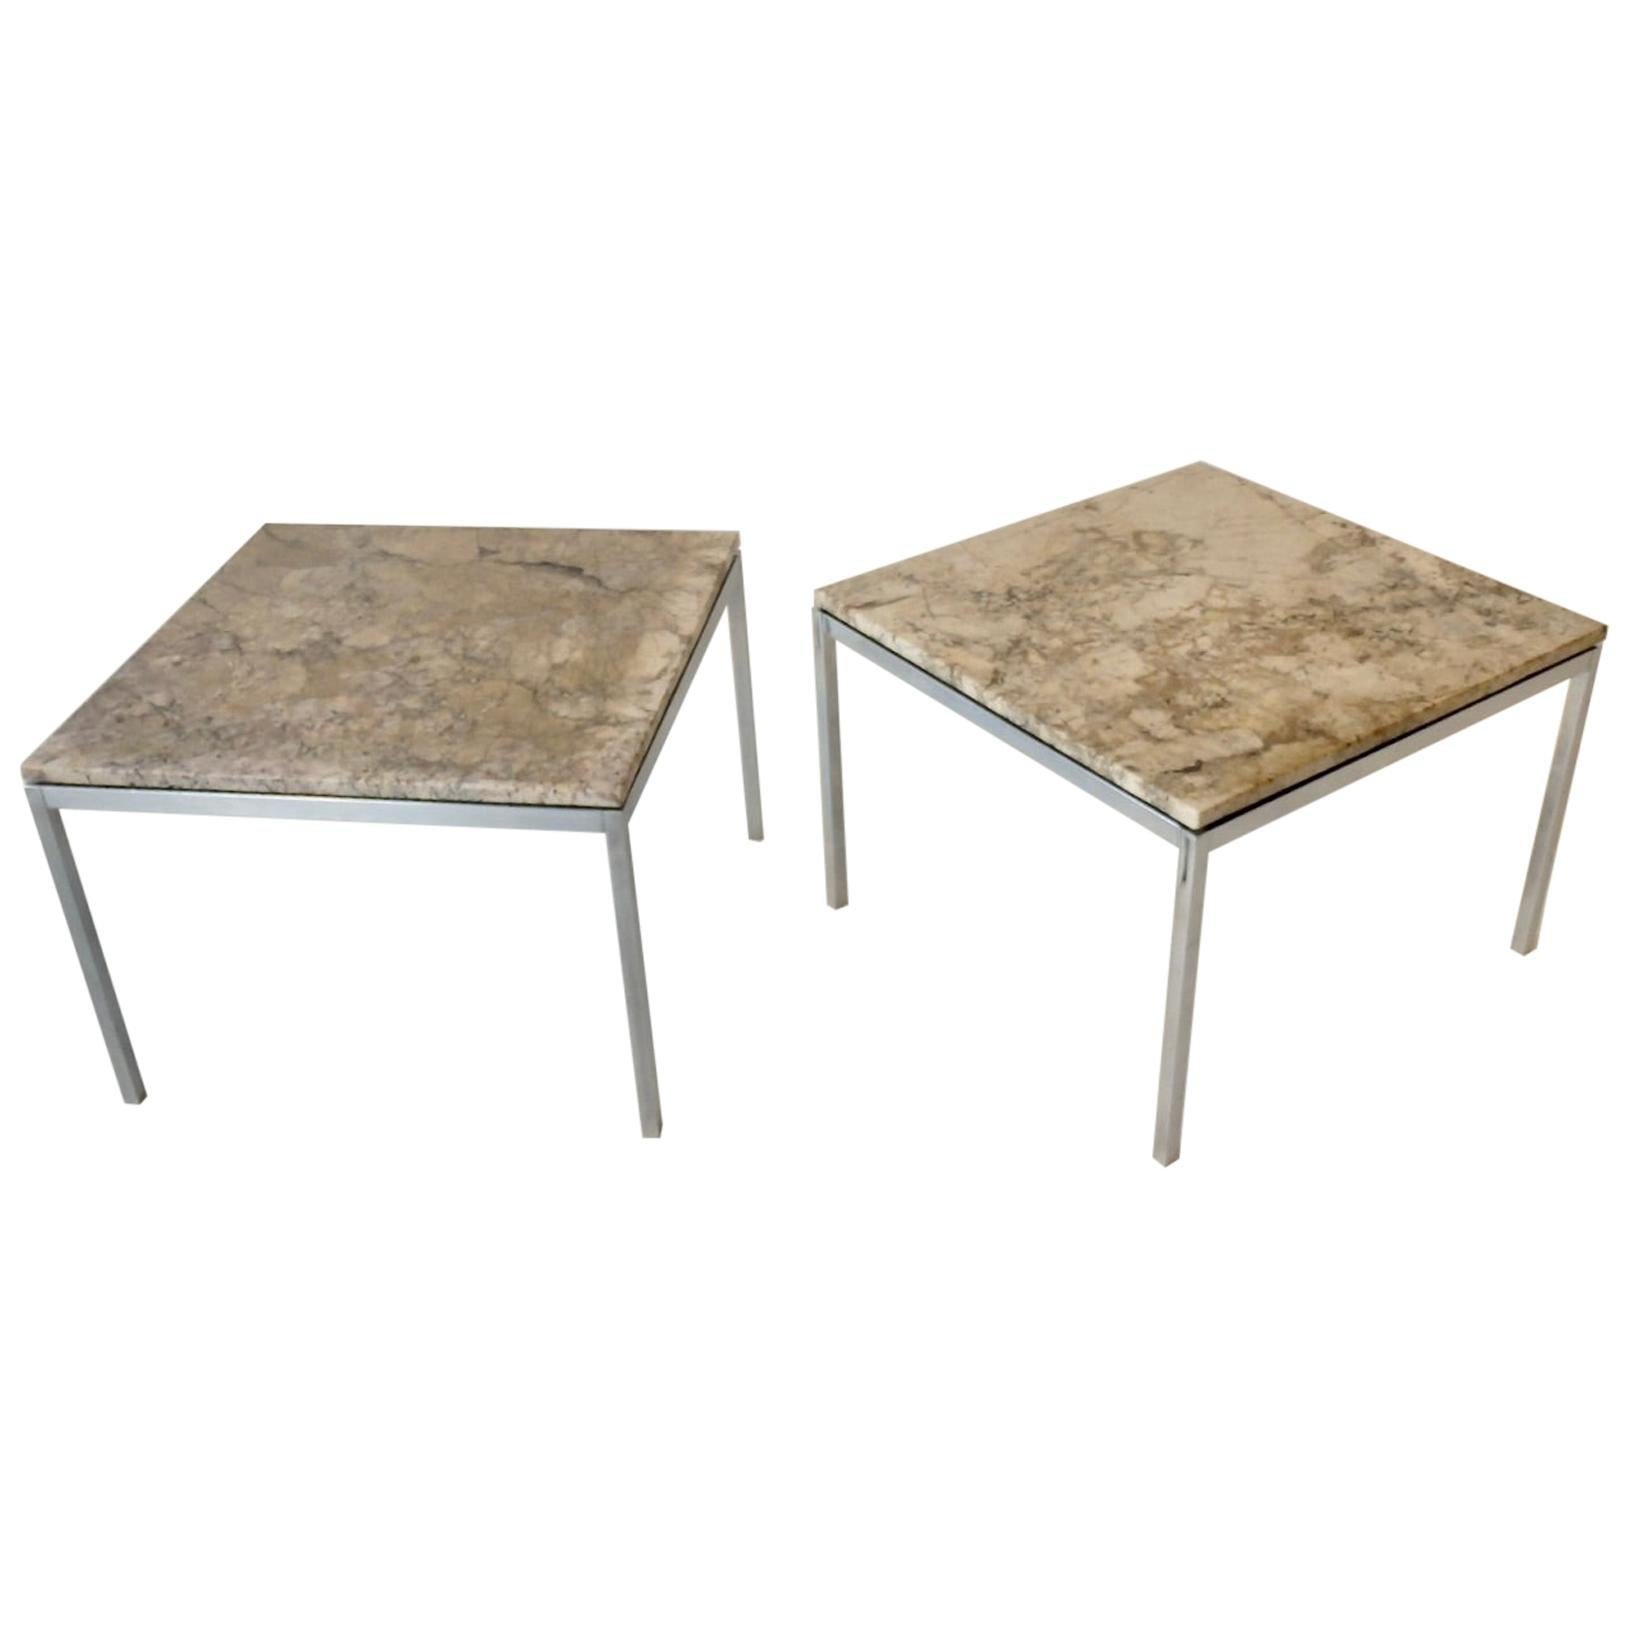 Two Exotic Stone Top Florence Knoll Side Tables One Chrome One Satin Finish Base